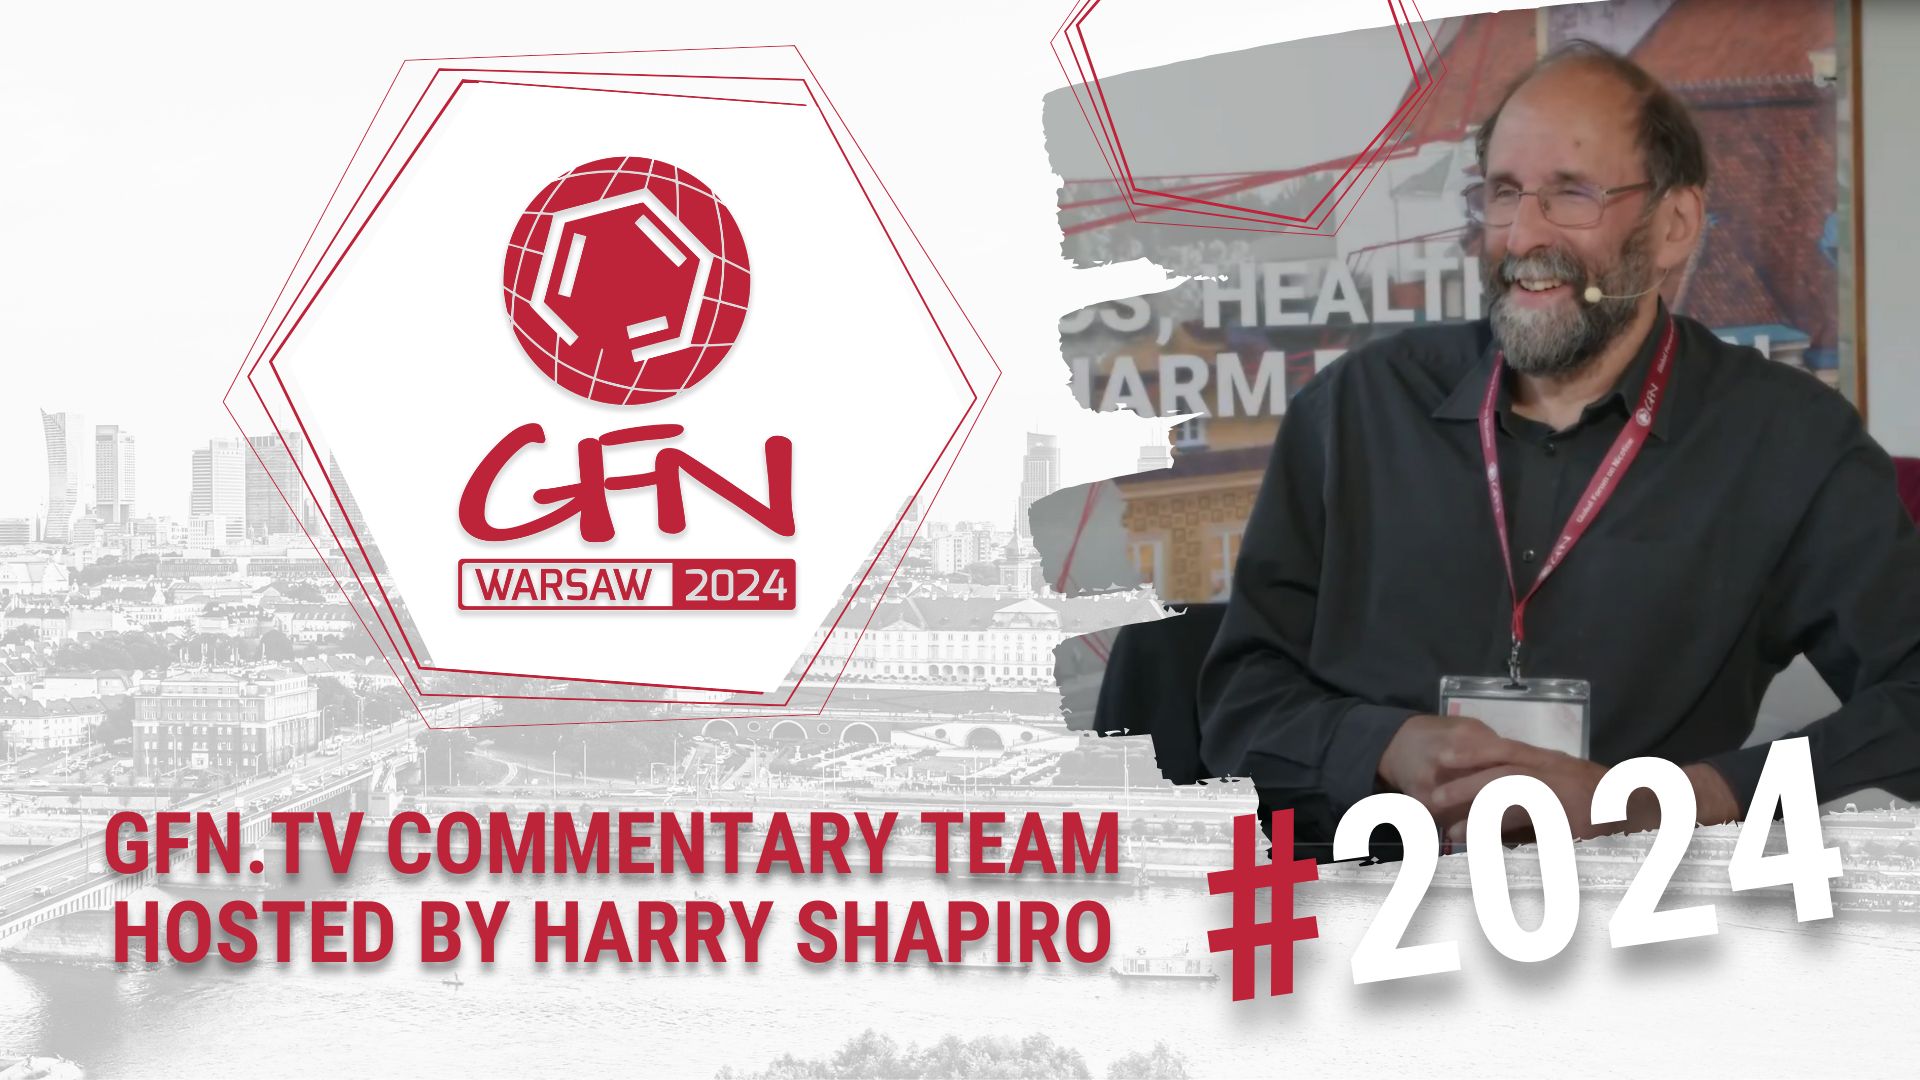 REASONS TO BE CHEERFUL | GFN24 Commentary Team hosted by Harry Shapiro